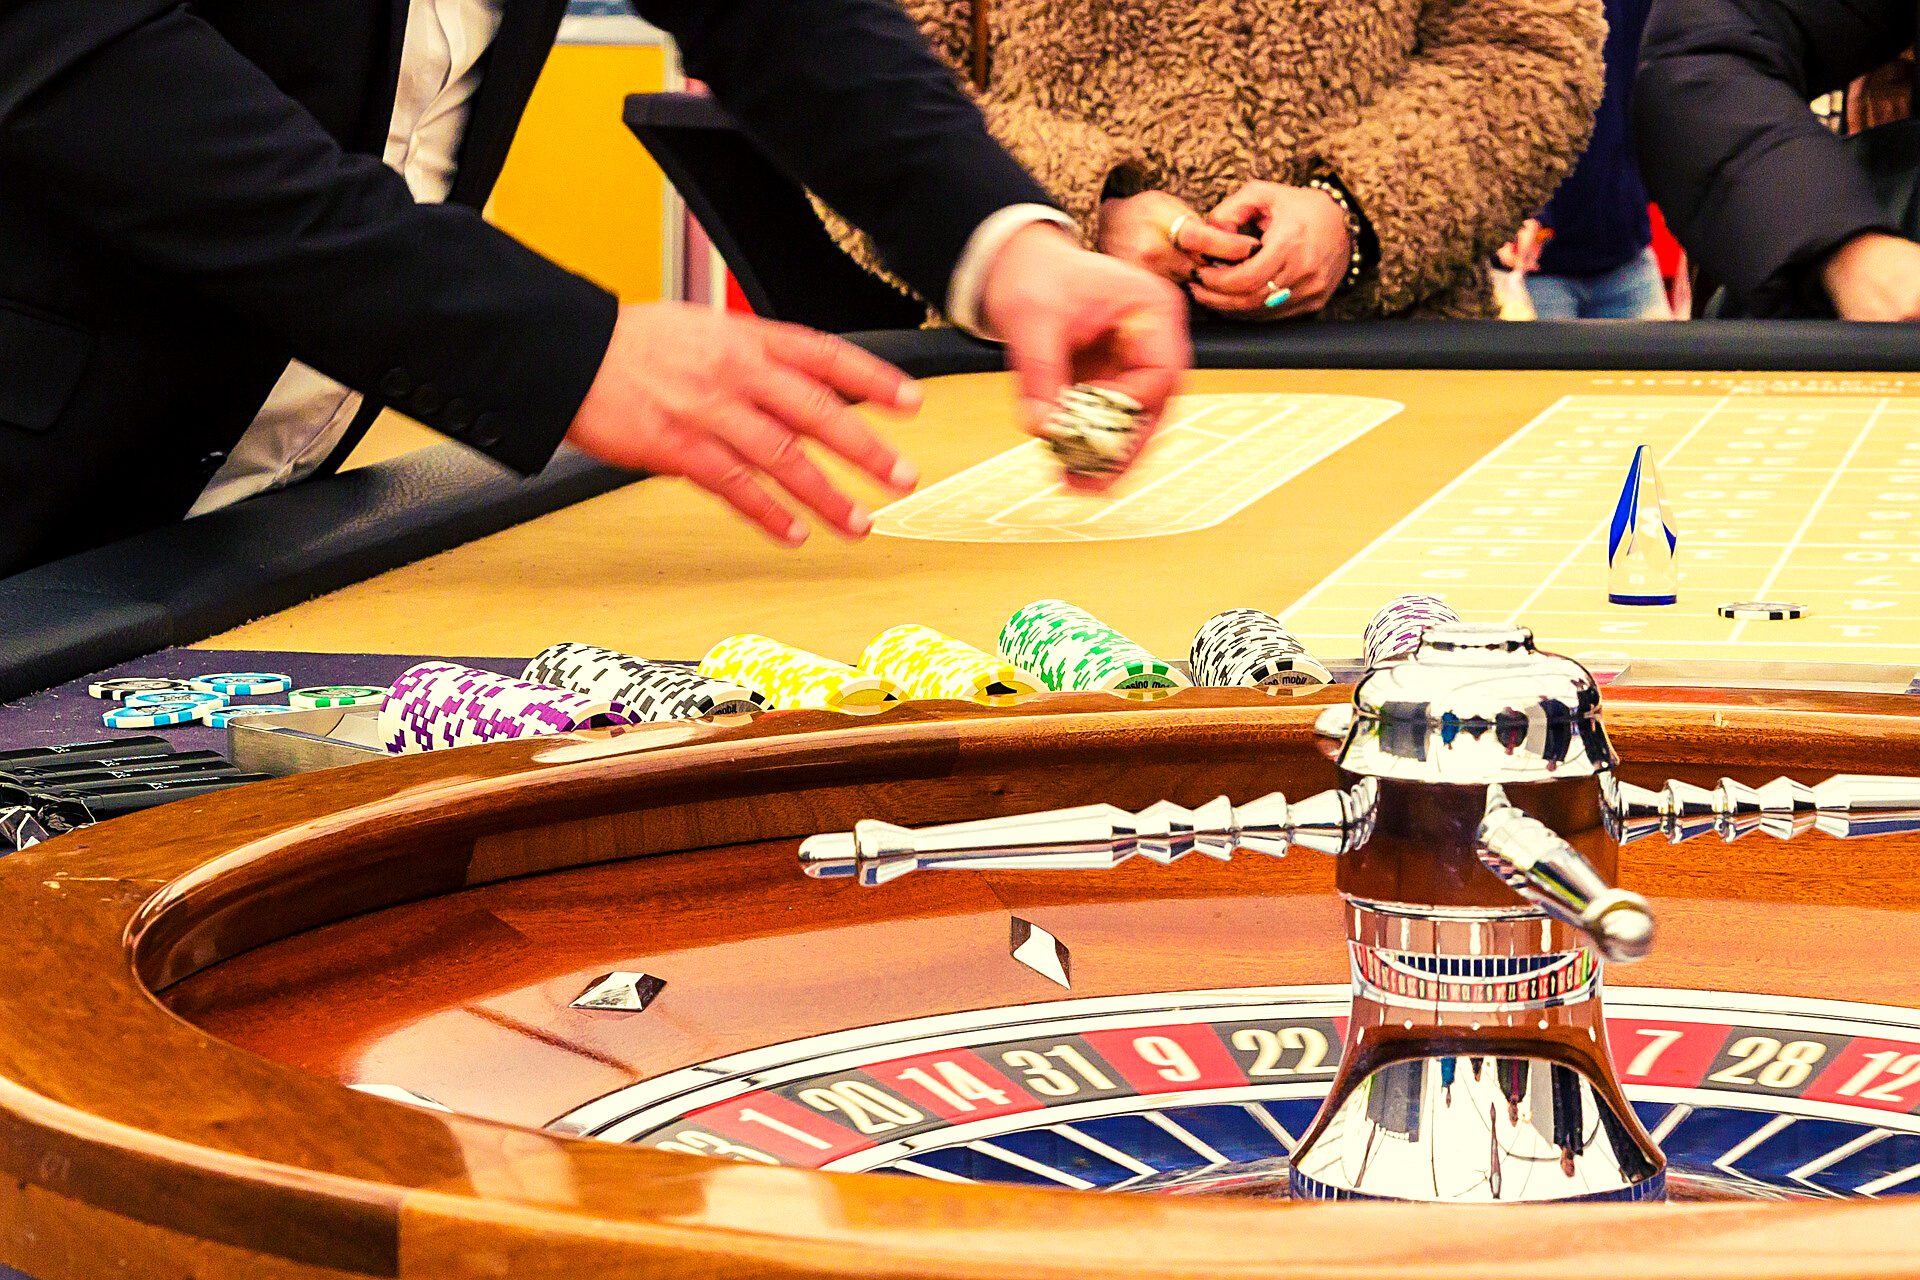 Exploring the Thrills and Risks of Online Casinos